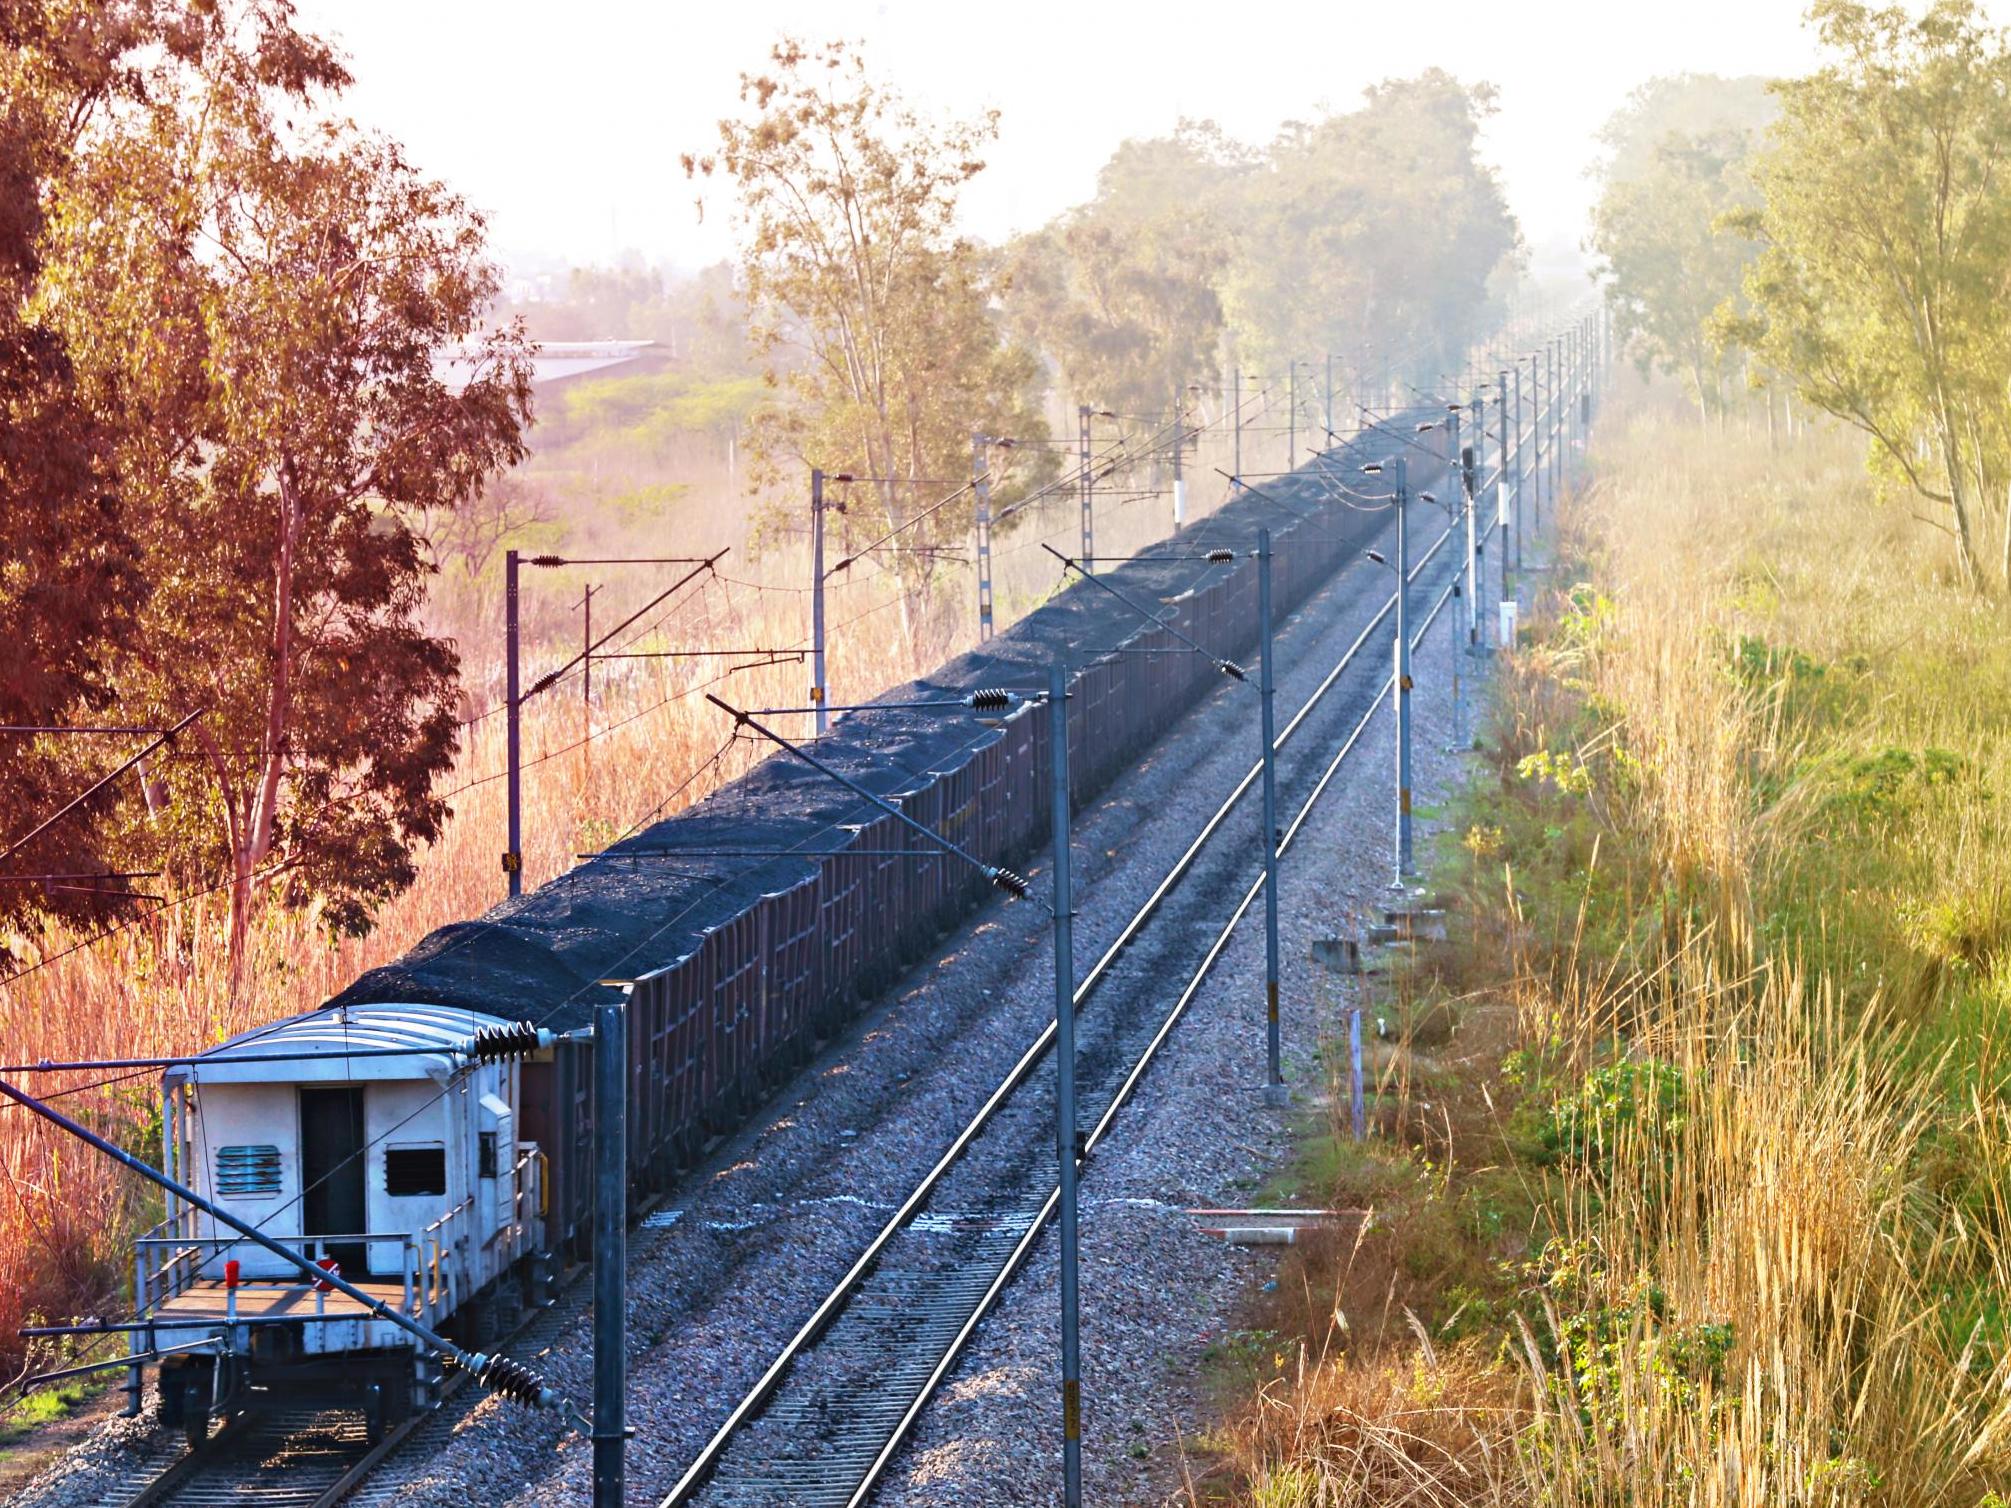 A train carrying coal in India, where demand for electricity is expected to double in 20 years